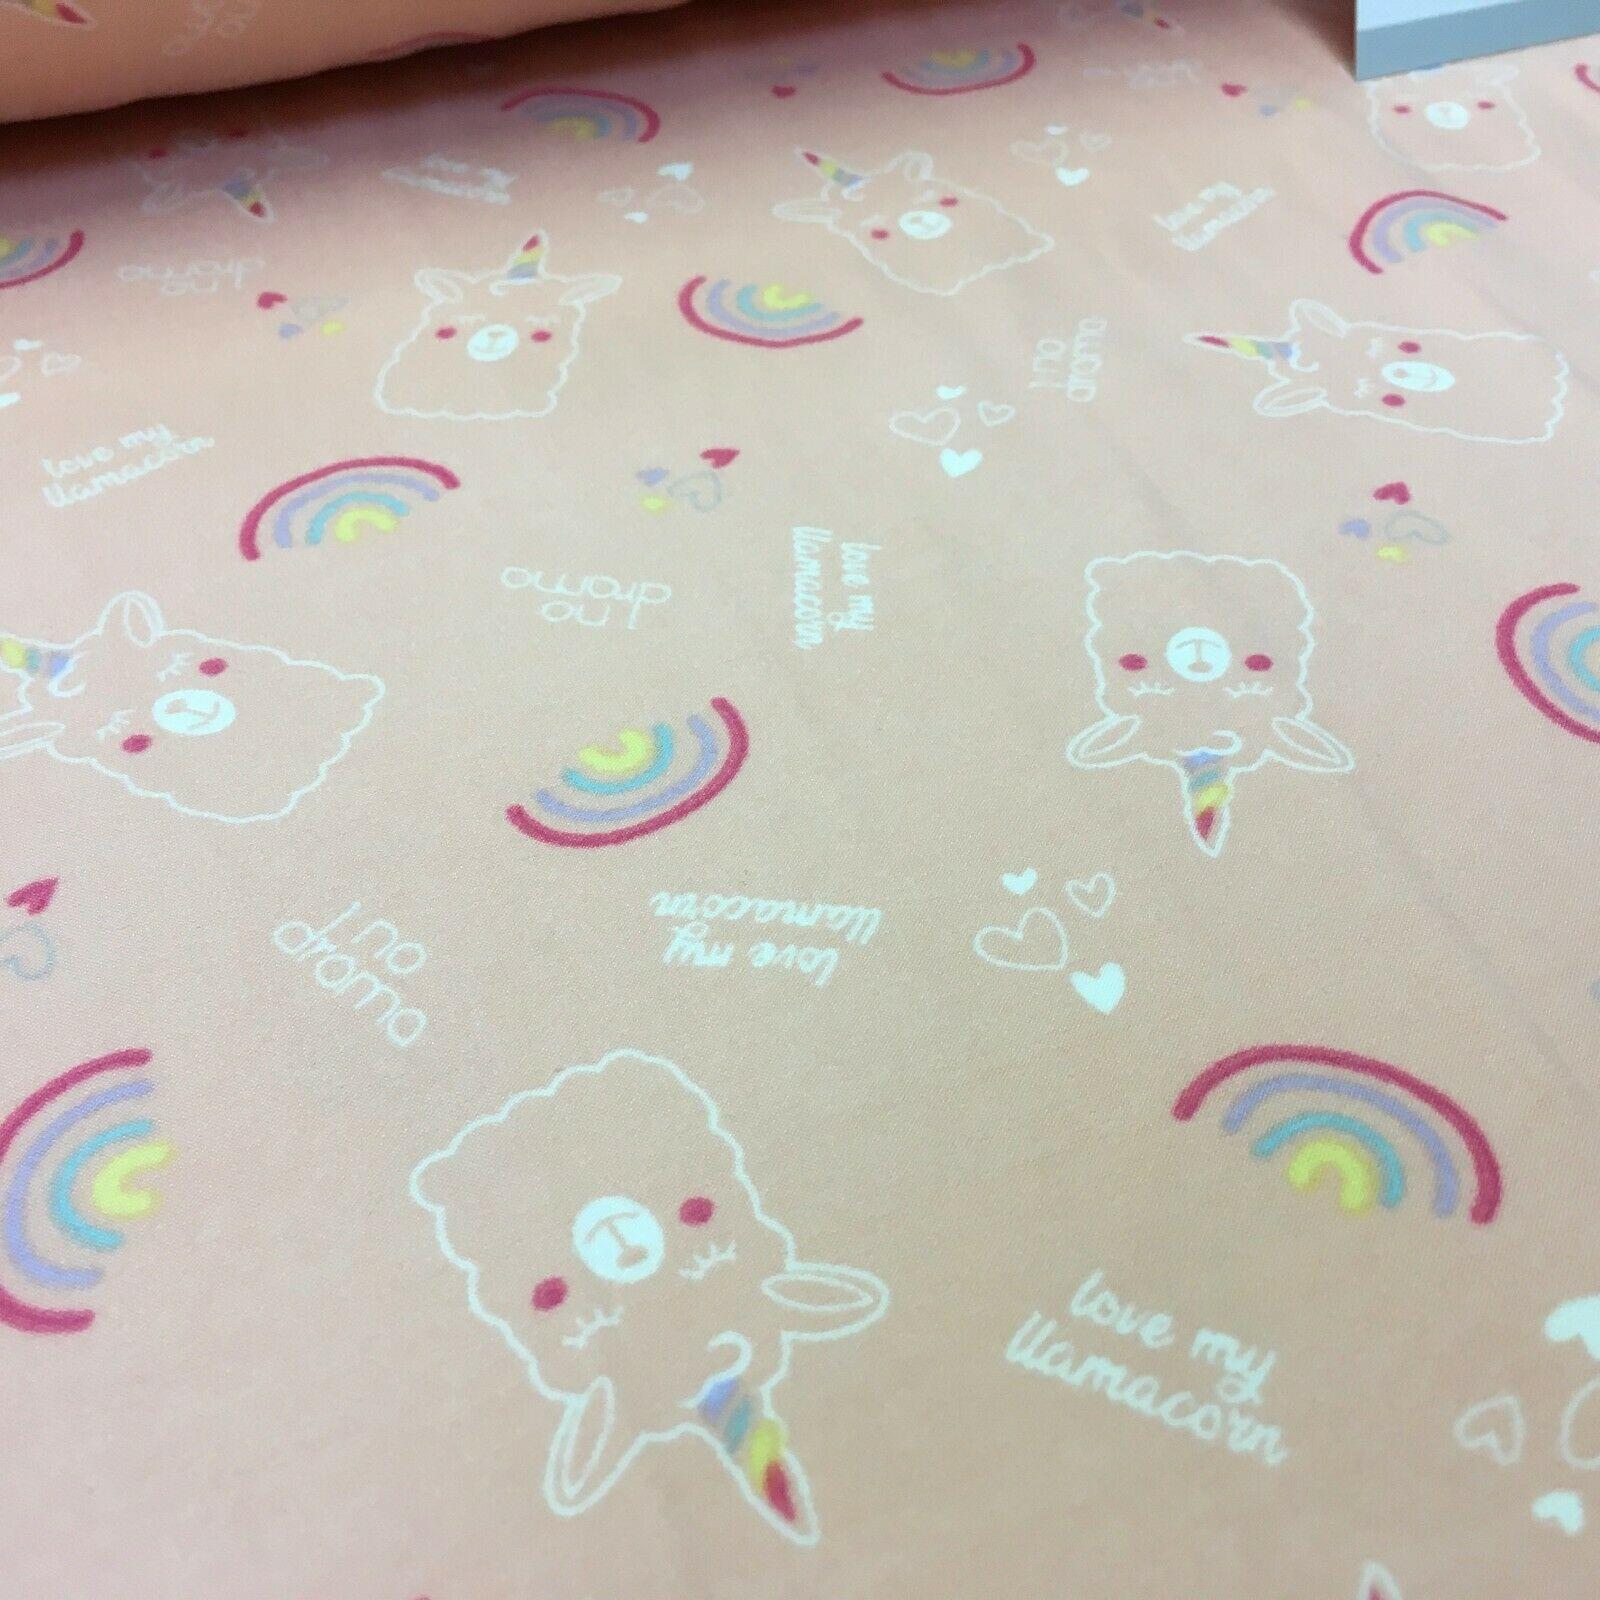 Peach doodle Rainbow Printed Brushed Jersey Dress fabric 150cm Wide MK1106-2